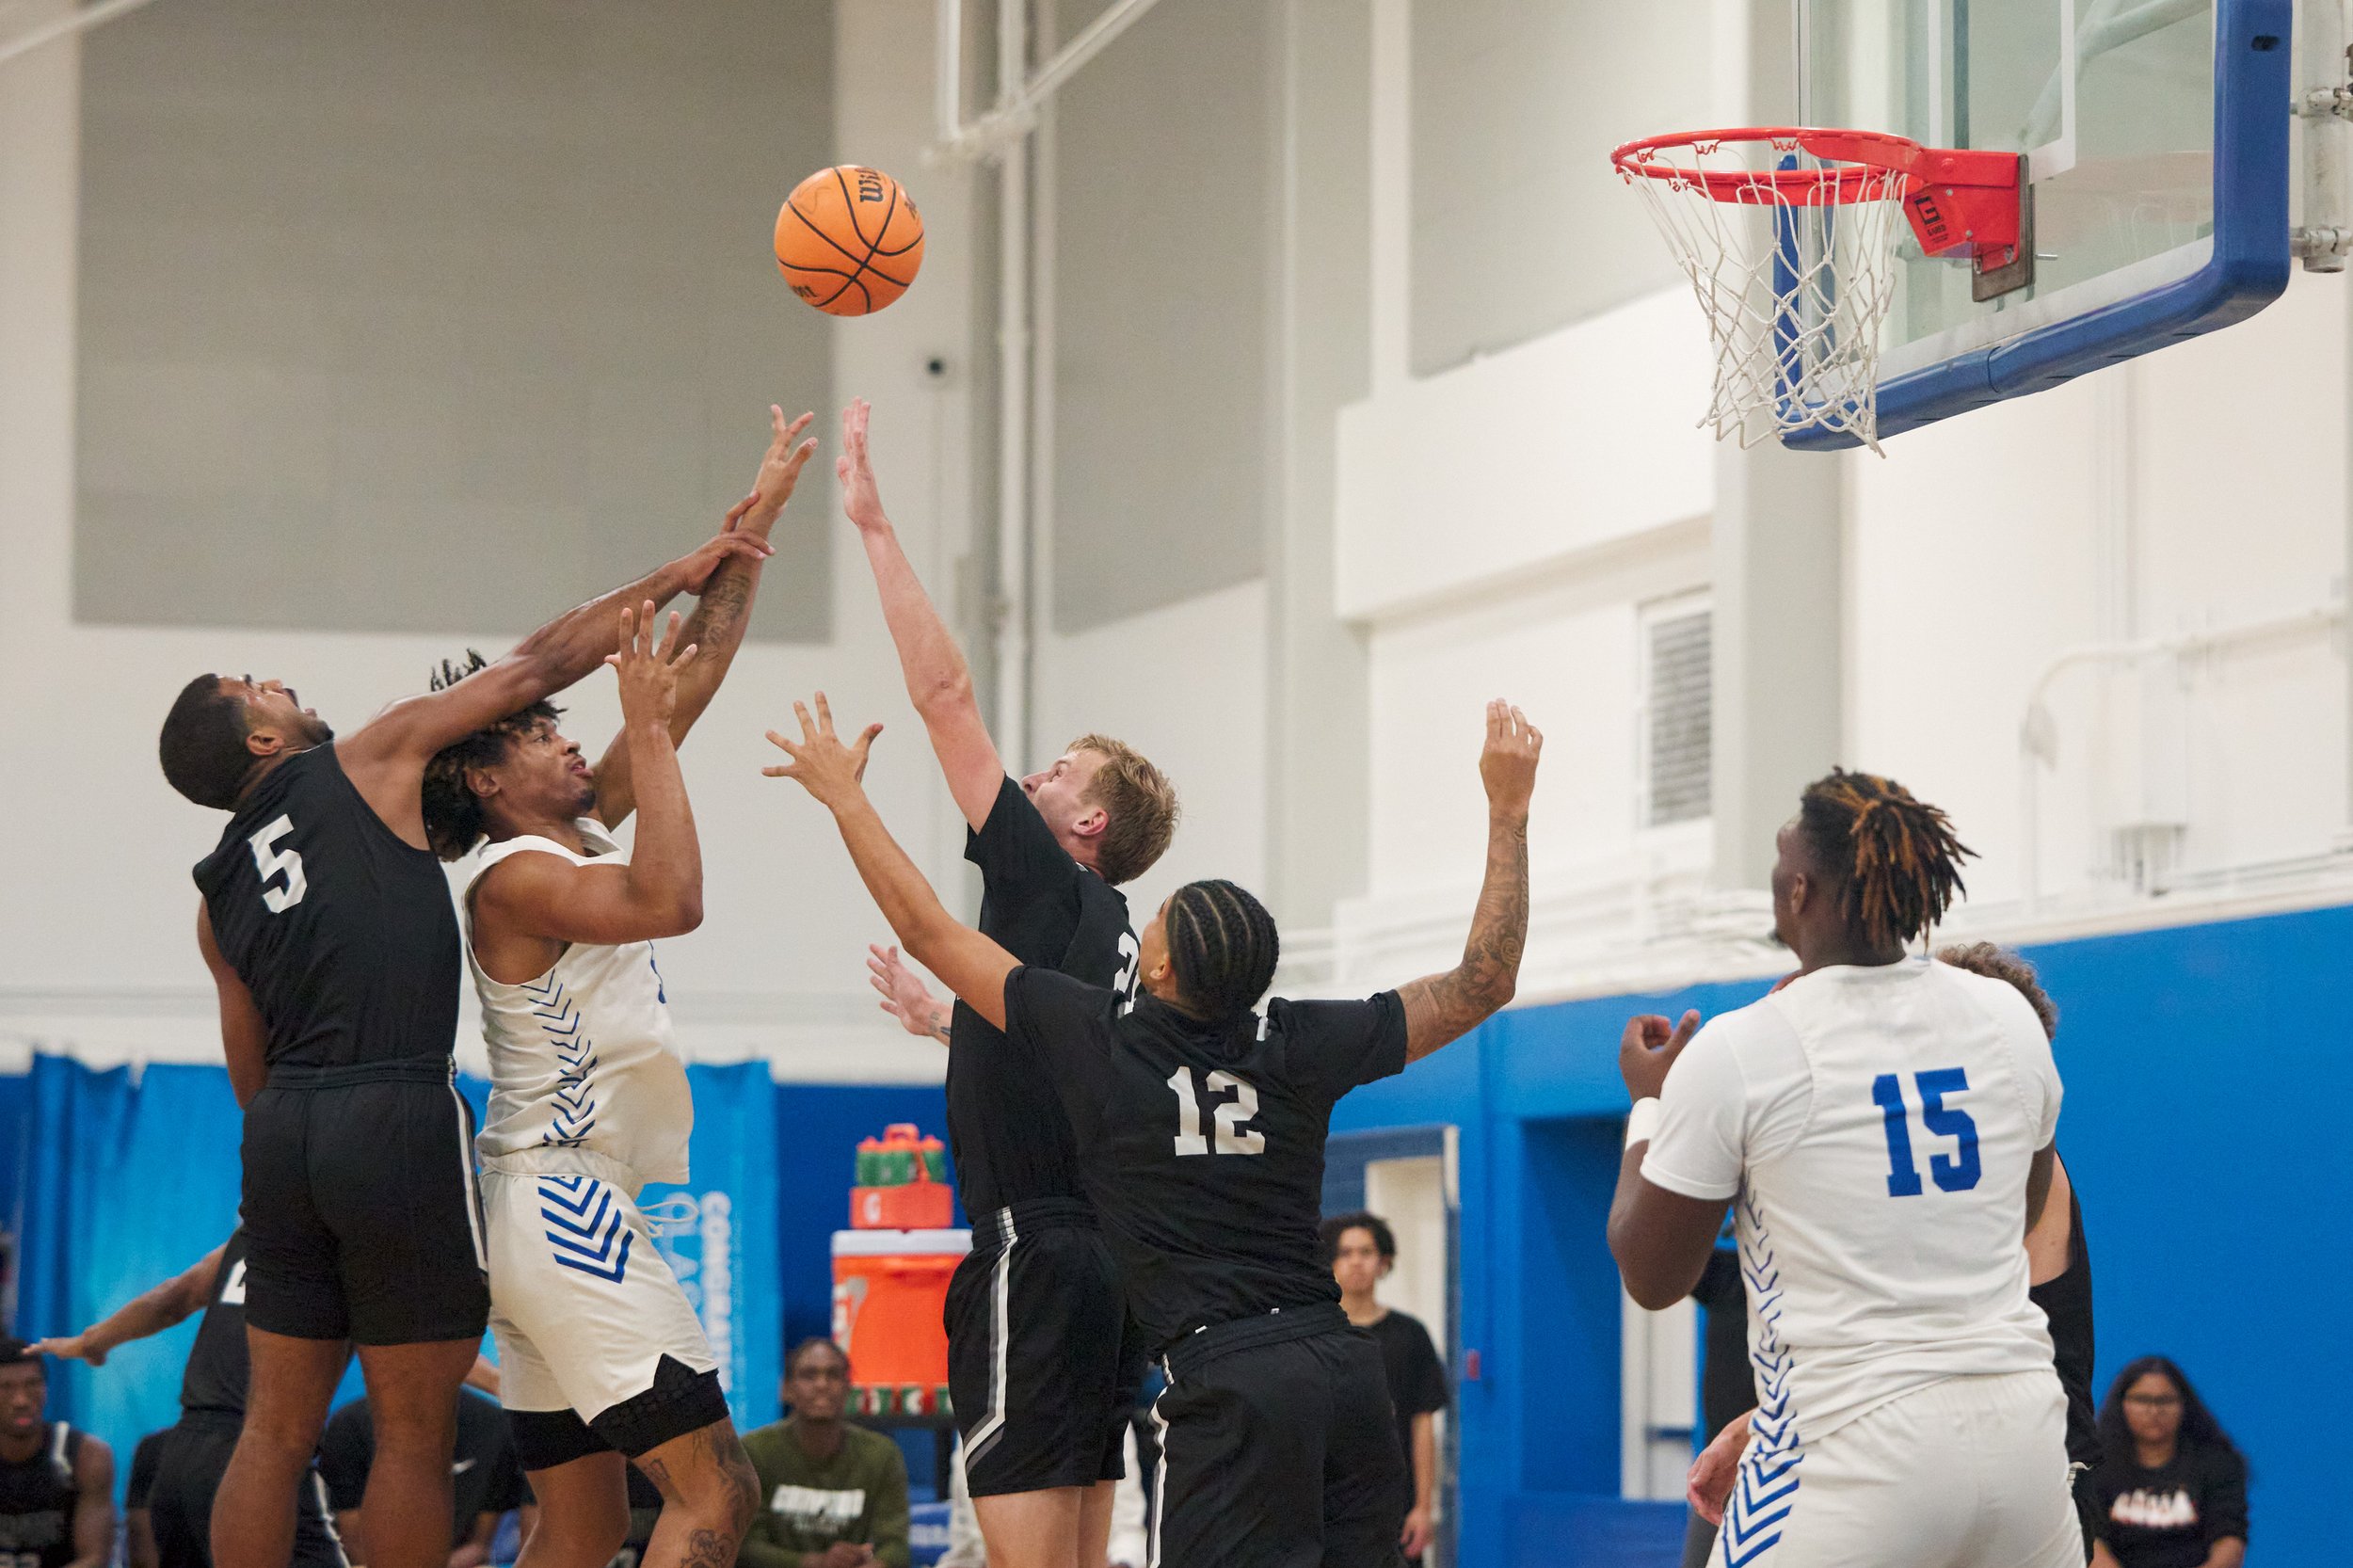  Santa Monica College Corsairs' Elijah Scranton (second from left) shoots for a goal during the men's basketball game against the Compton College Tartars on Wednesday, Nov. 8, 2023, at Corsair Gym in Santa Monica, Calif. The Corsairs won 94-86. (Nich